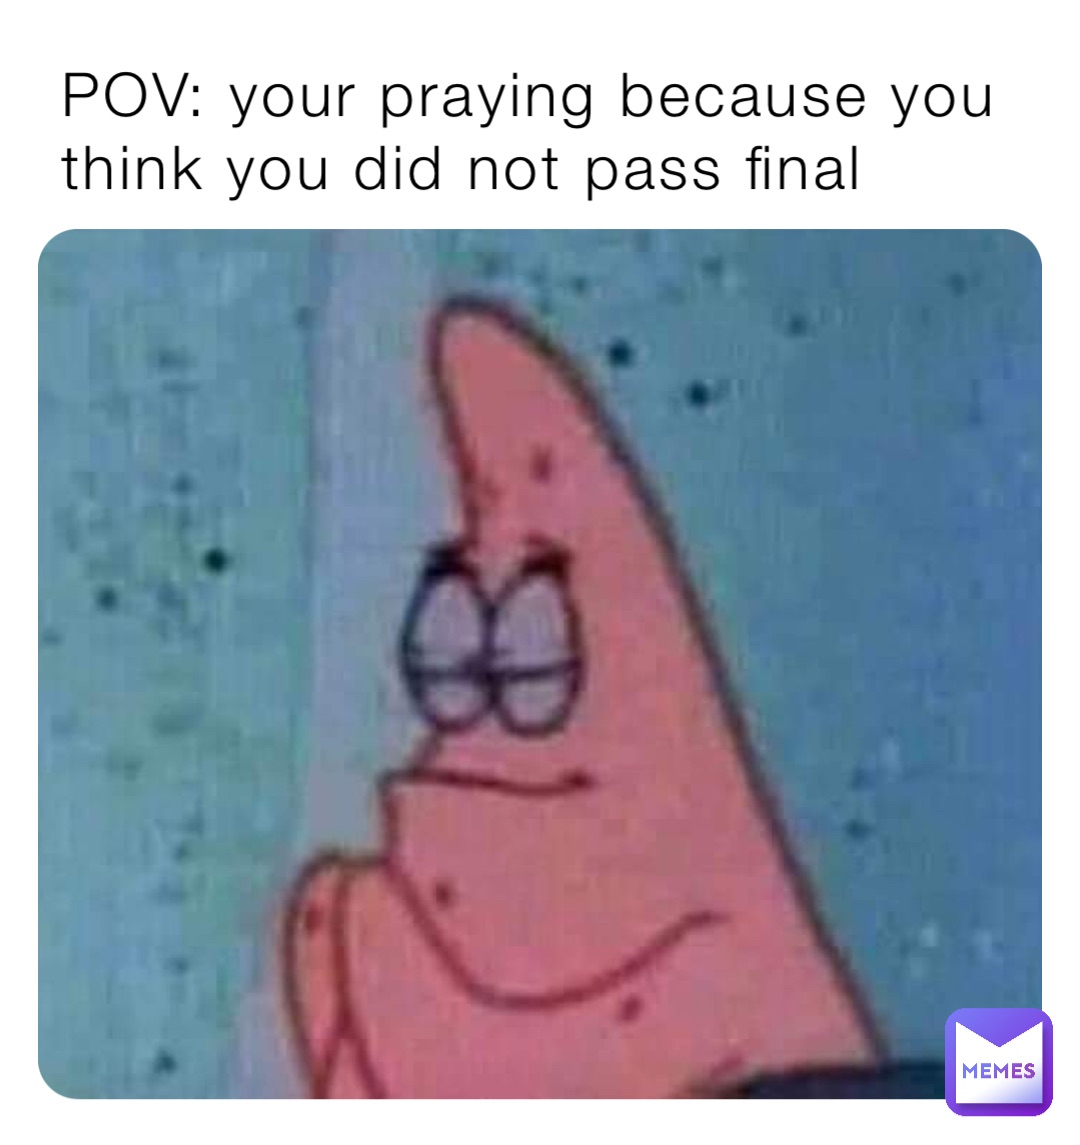 POV: your praying because you think you did not pass final